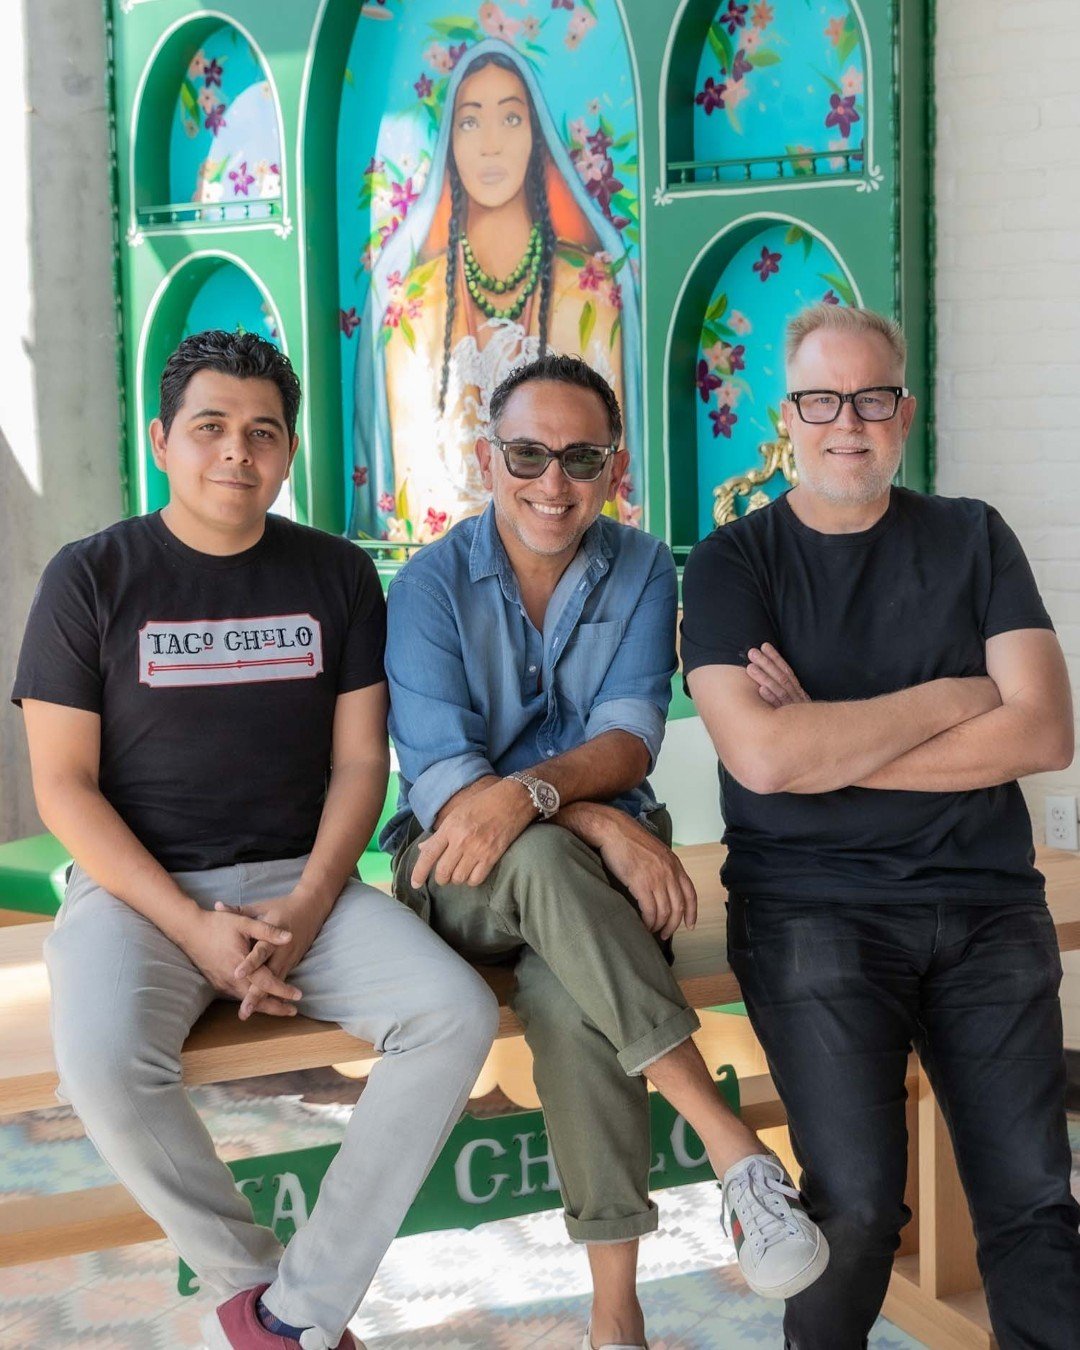 Taco lovers, rejoice! @tacochelo is opening its highly anticipated second location in downtown Tempe on Friday, May 10. Promising to be Tempe's newest hotspot, it exudes Mexican charm and artistic ambiance that makes it as much of a treat to the eyes